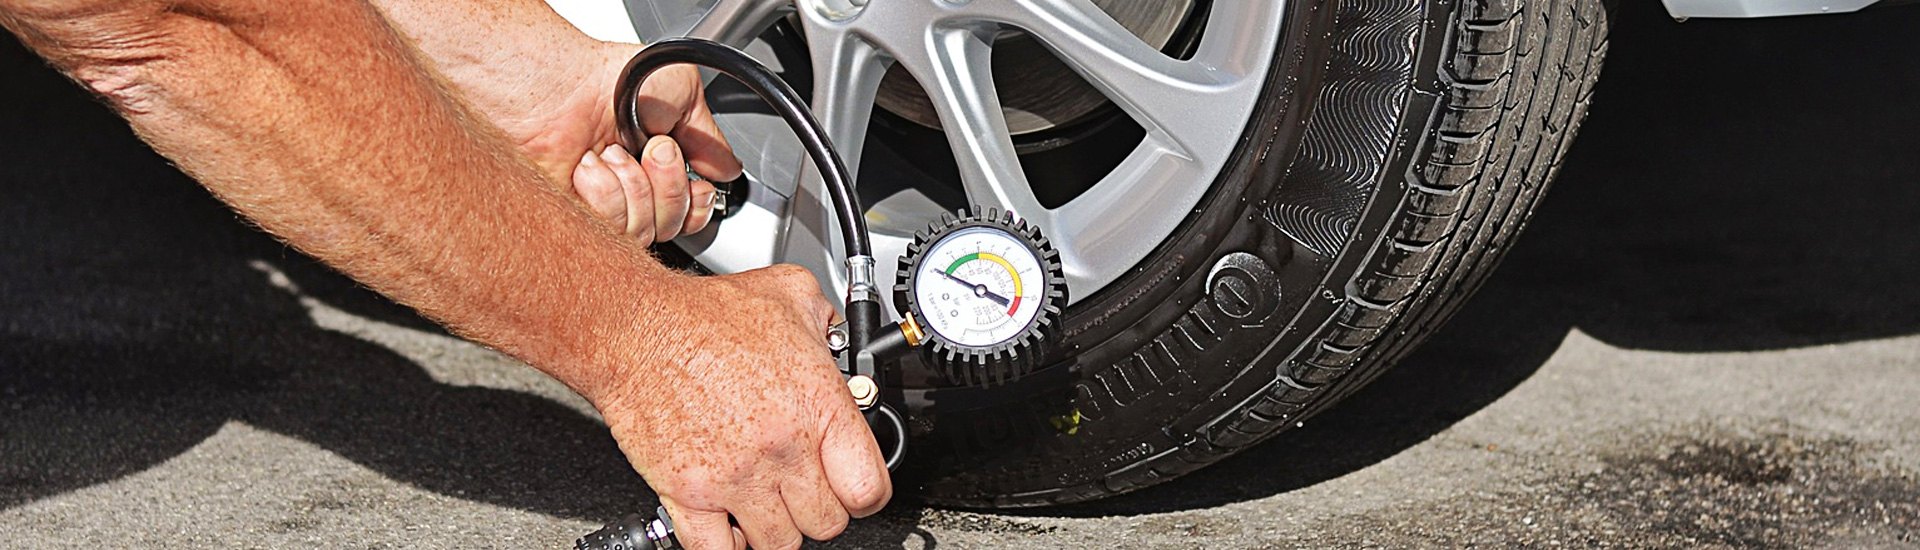 Tire Pressure Gauges | The Must-have Glovebox Accessory